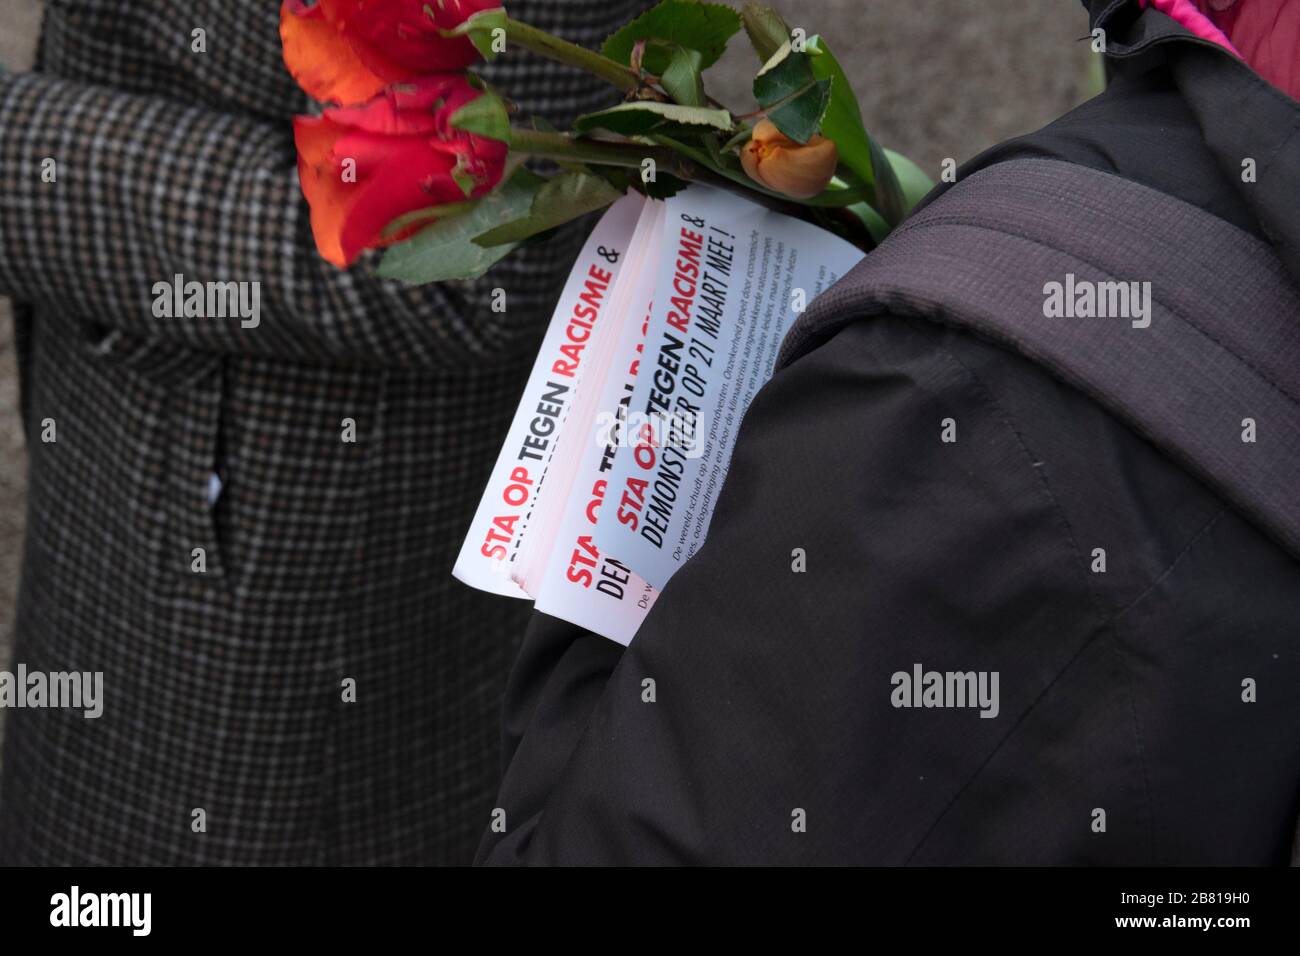 Pamphlet Stand Up Against Racism At 21 March The Netherlands 2020 Stock Photo